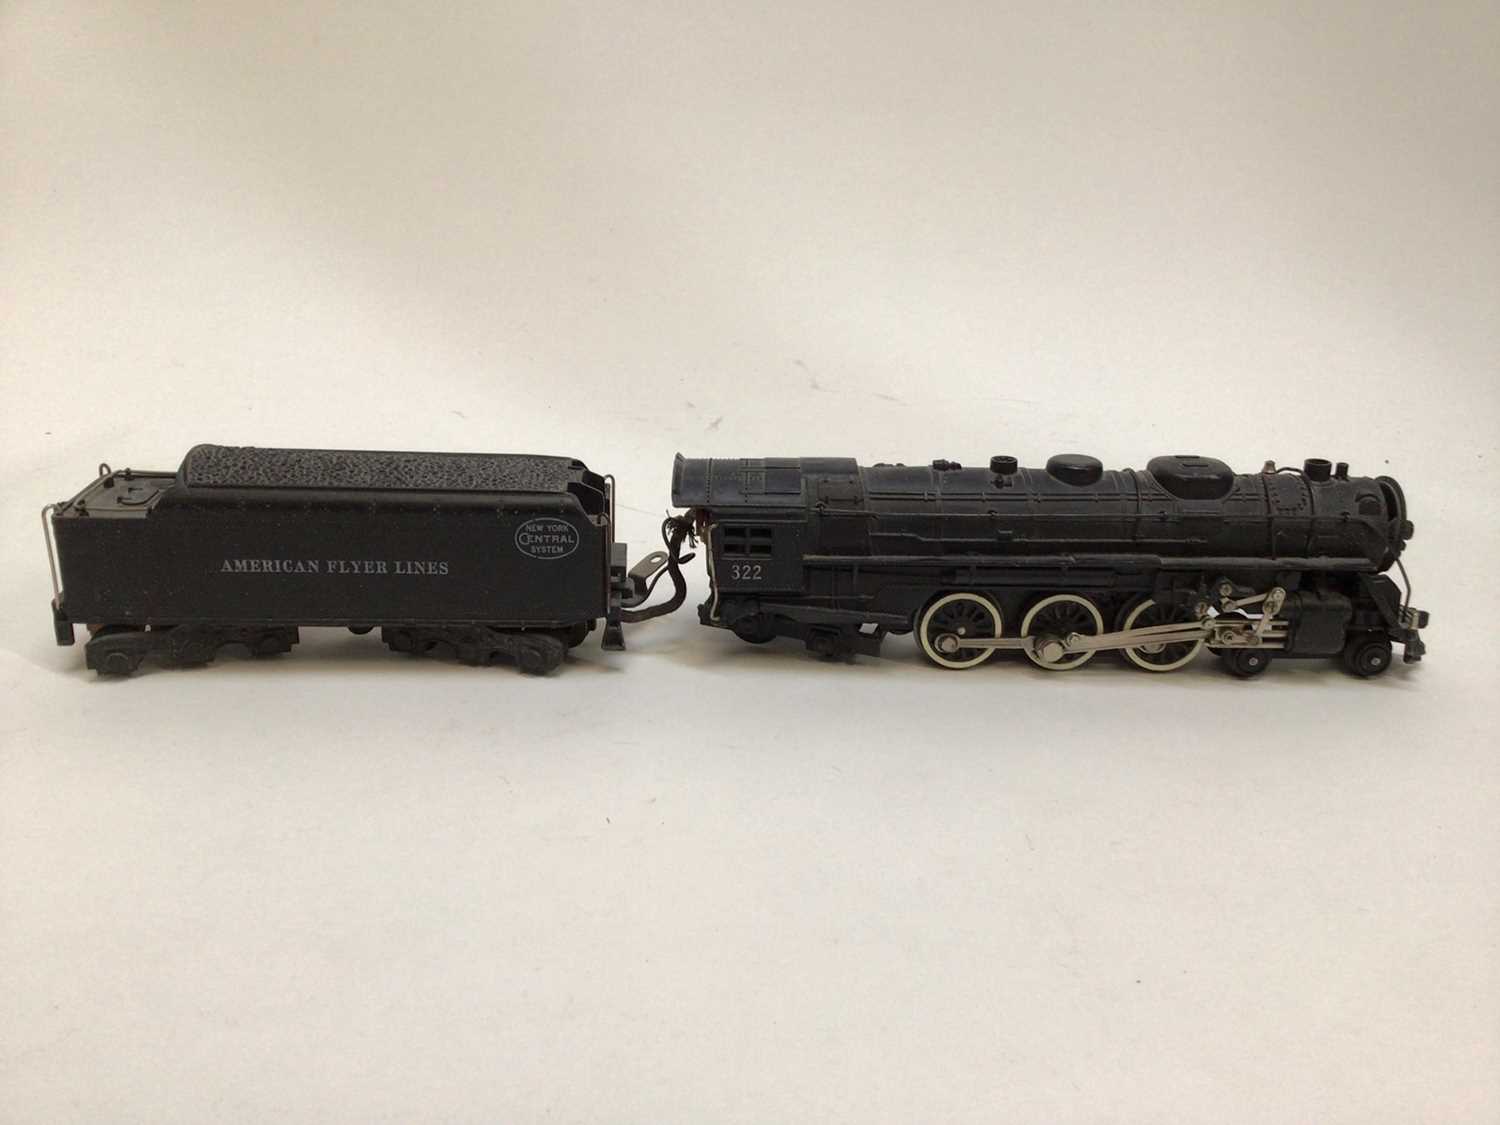 Lot 33 - Railway mixed selection including O Gauge locomotives American Flyer (x2) cast iron model and other tinplate models and a reproduction Poster (QTY)